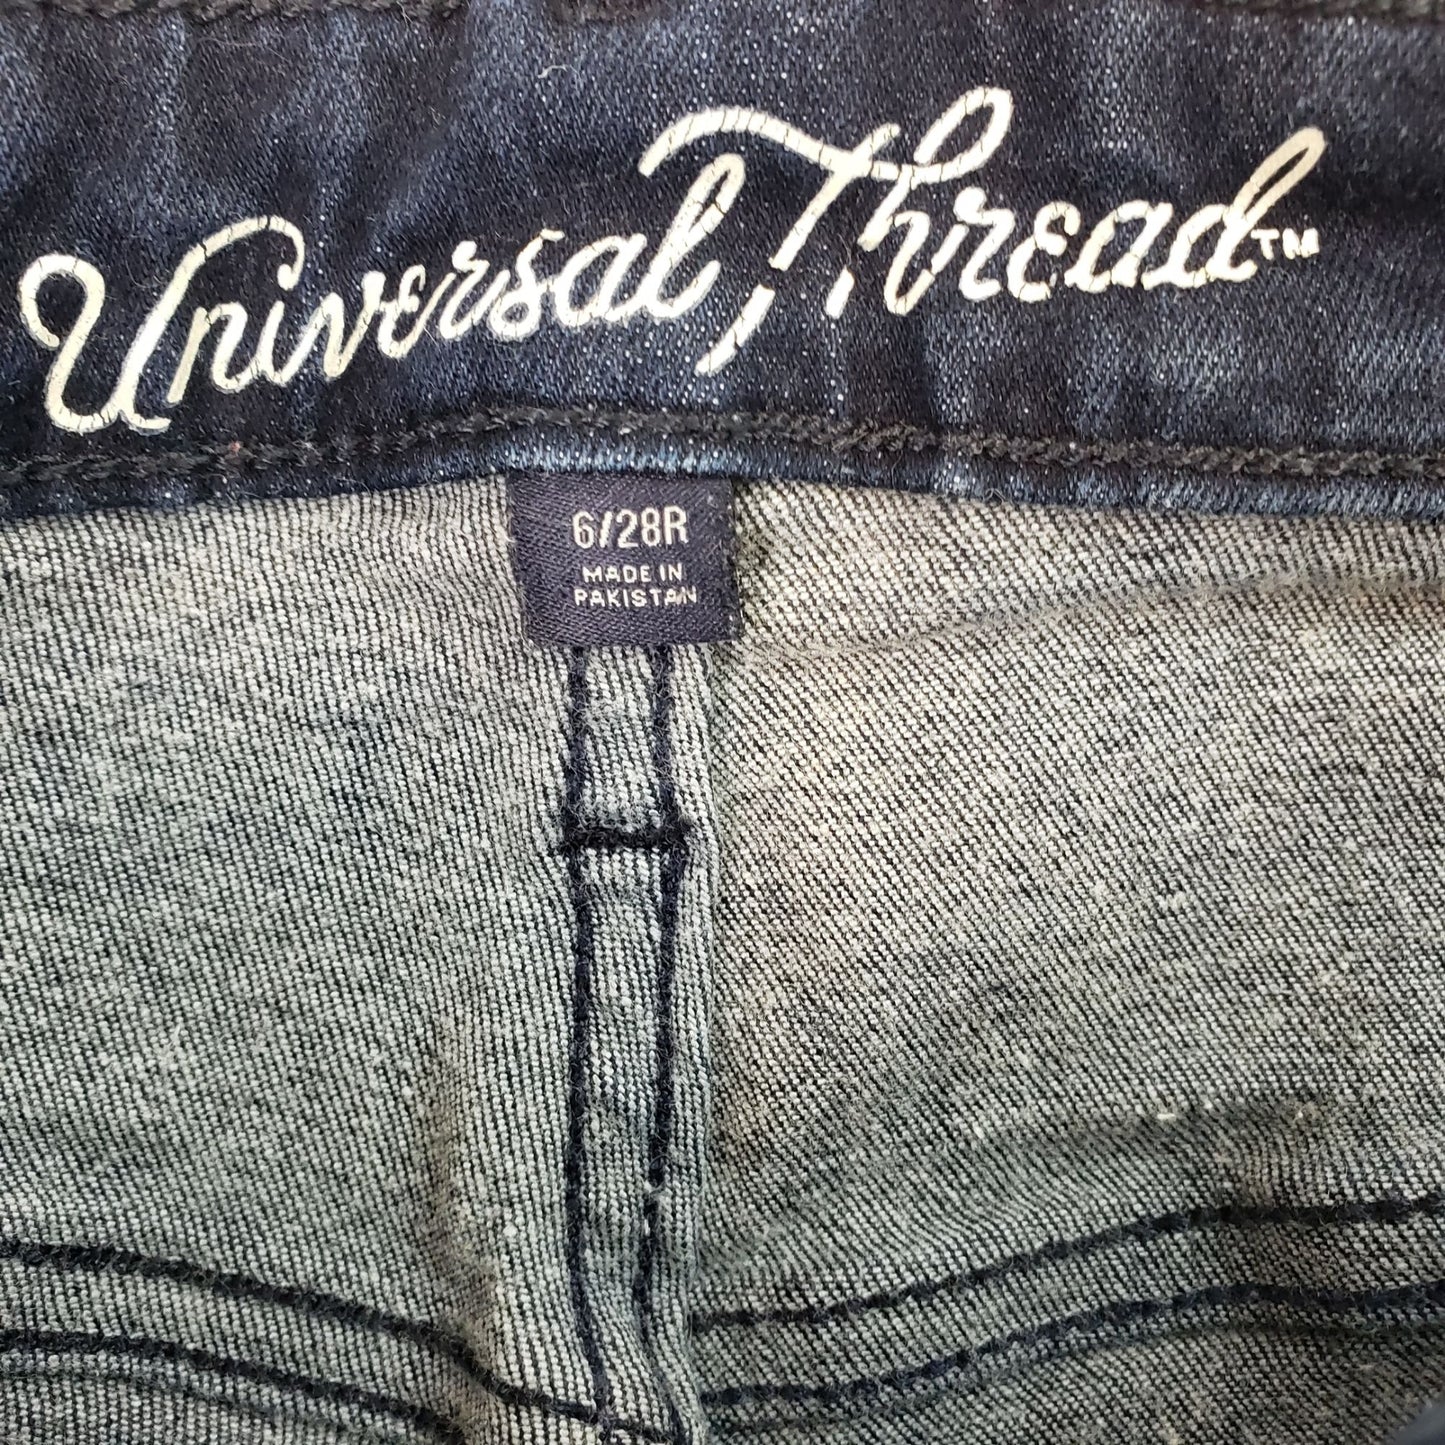 Universal Thread High Rise Skinny Jeans with Raw Hem Size 28